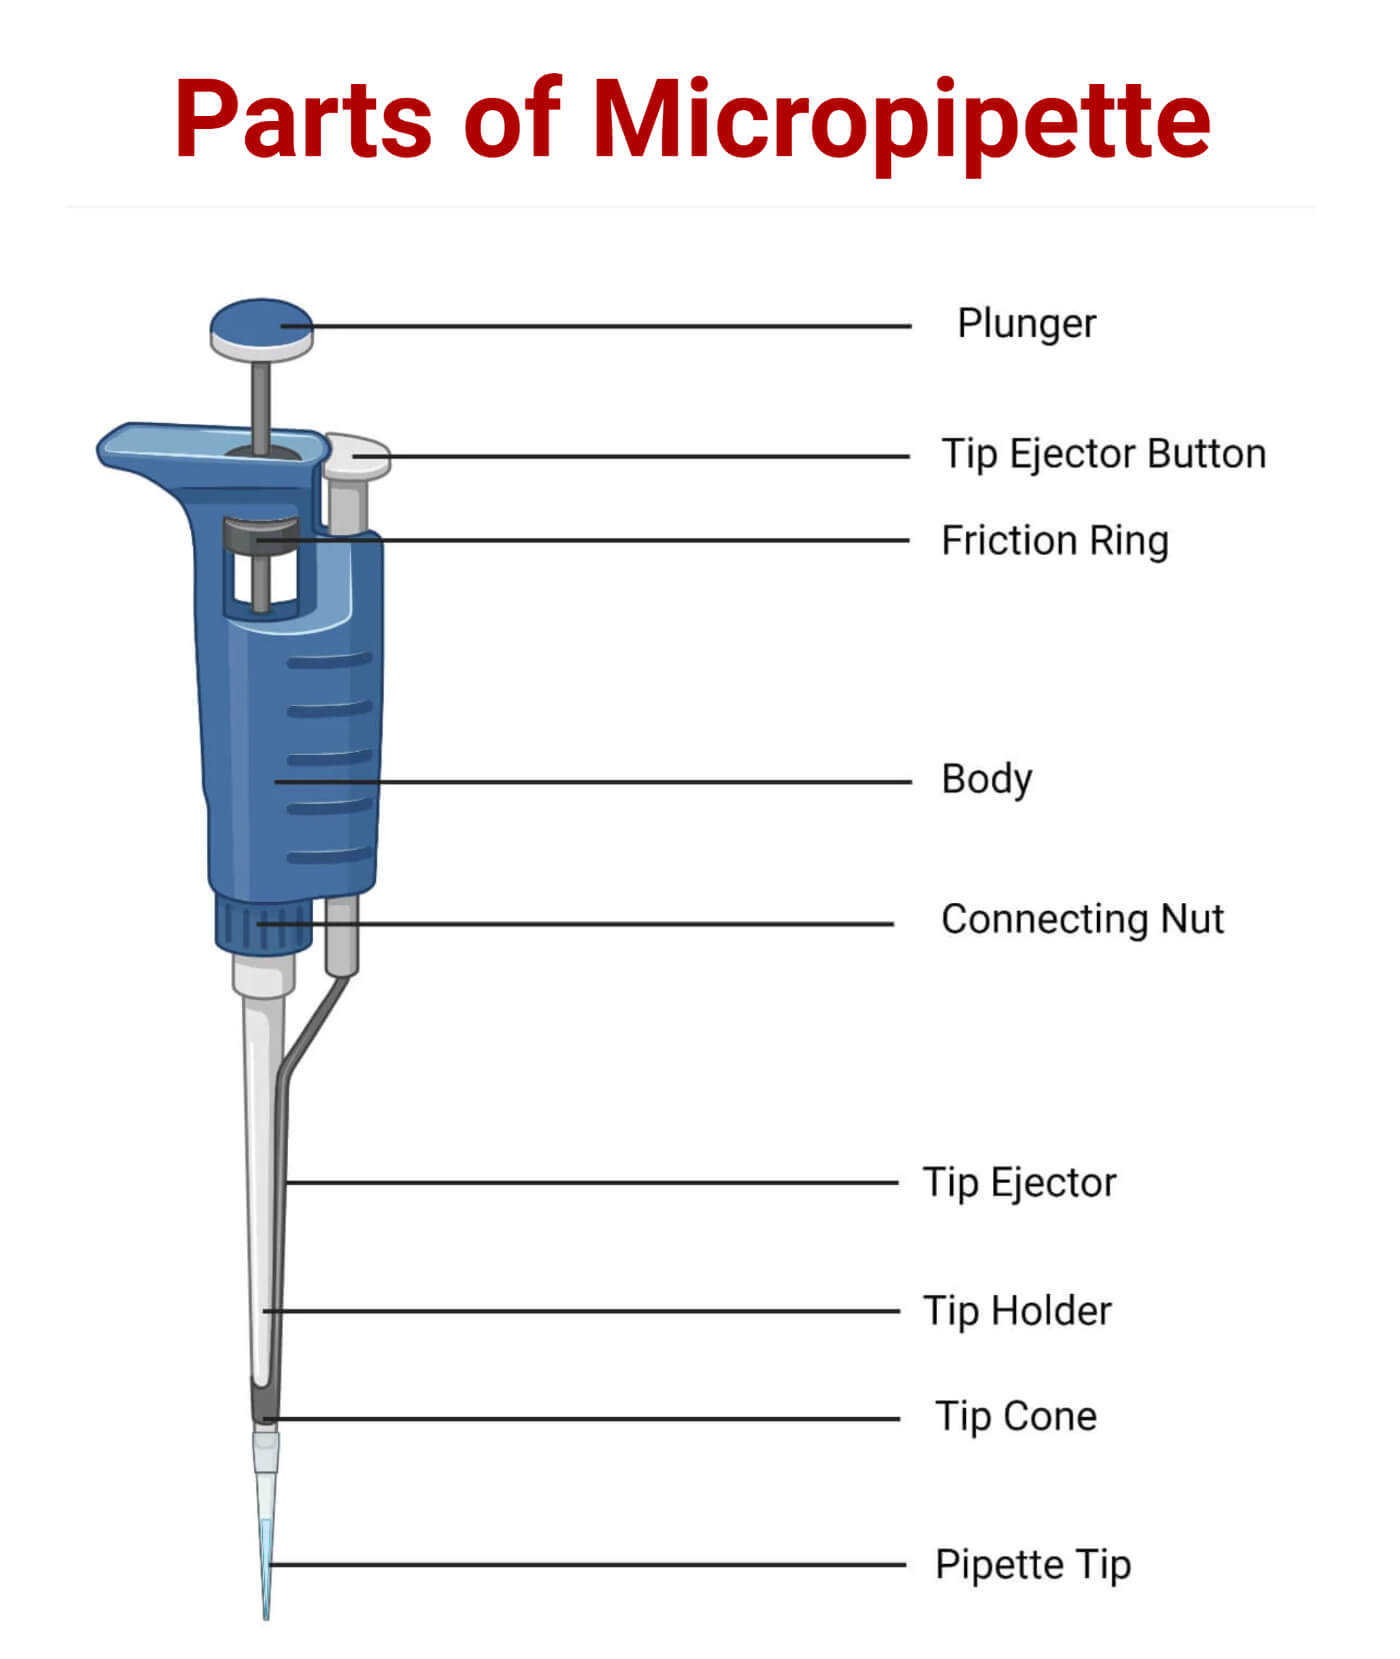 Parts of Micropipette